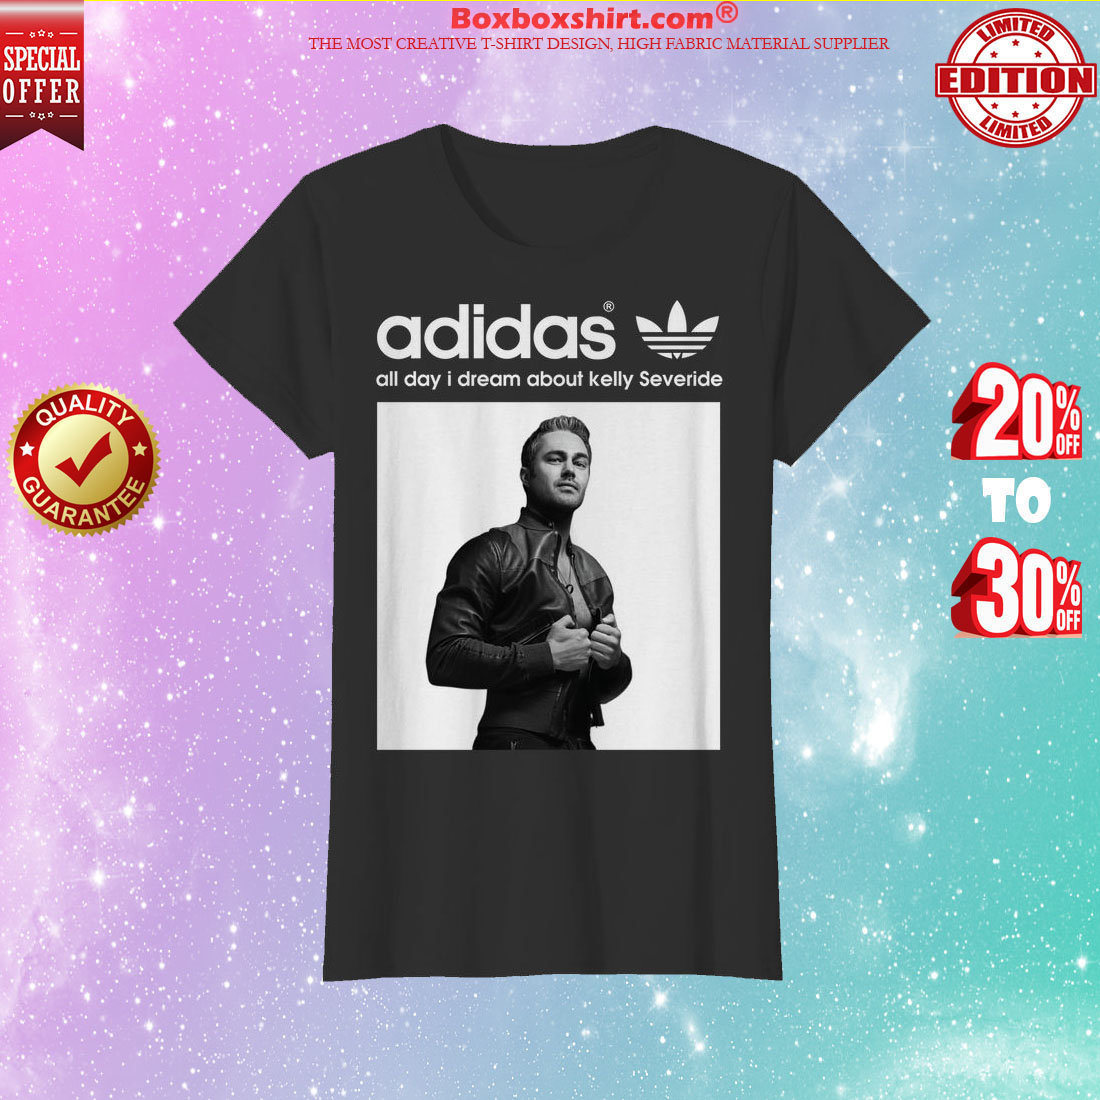 Adidas all day I dream about Kelly Severide classic shirt